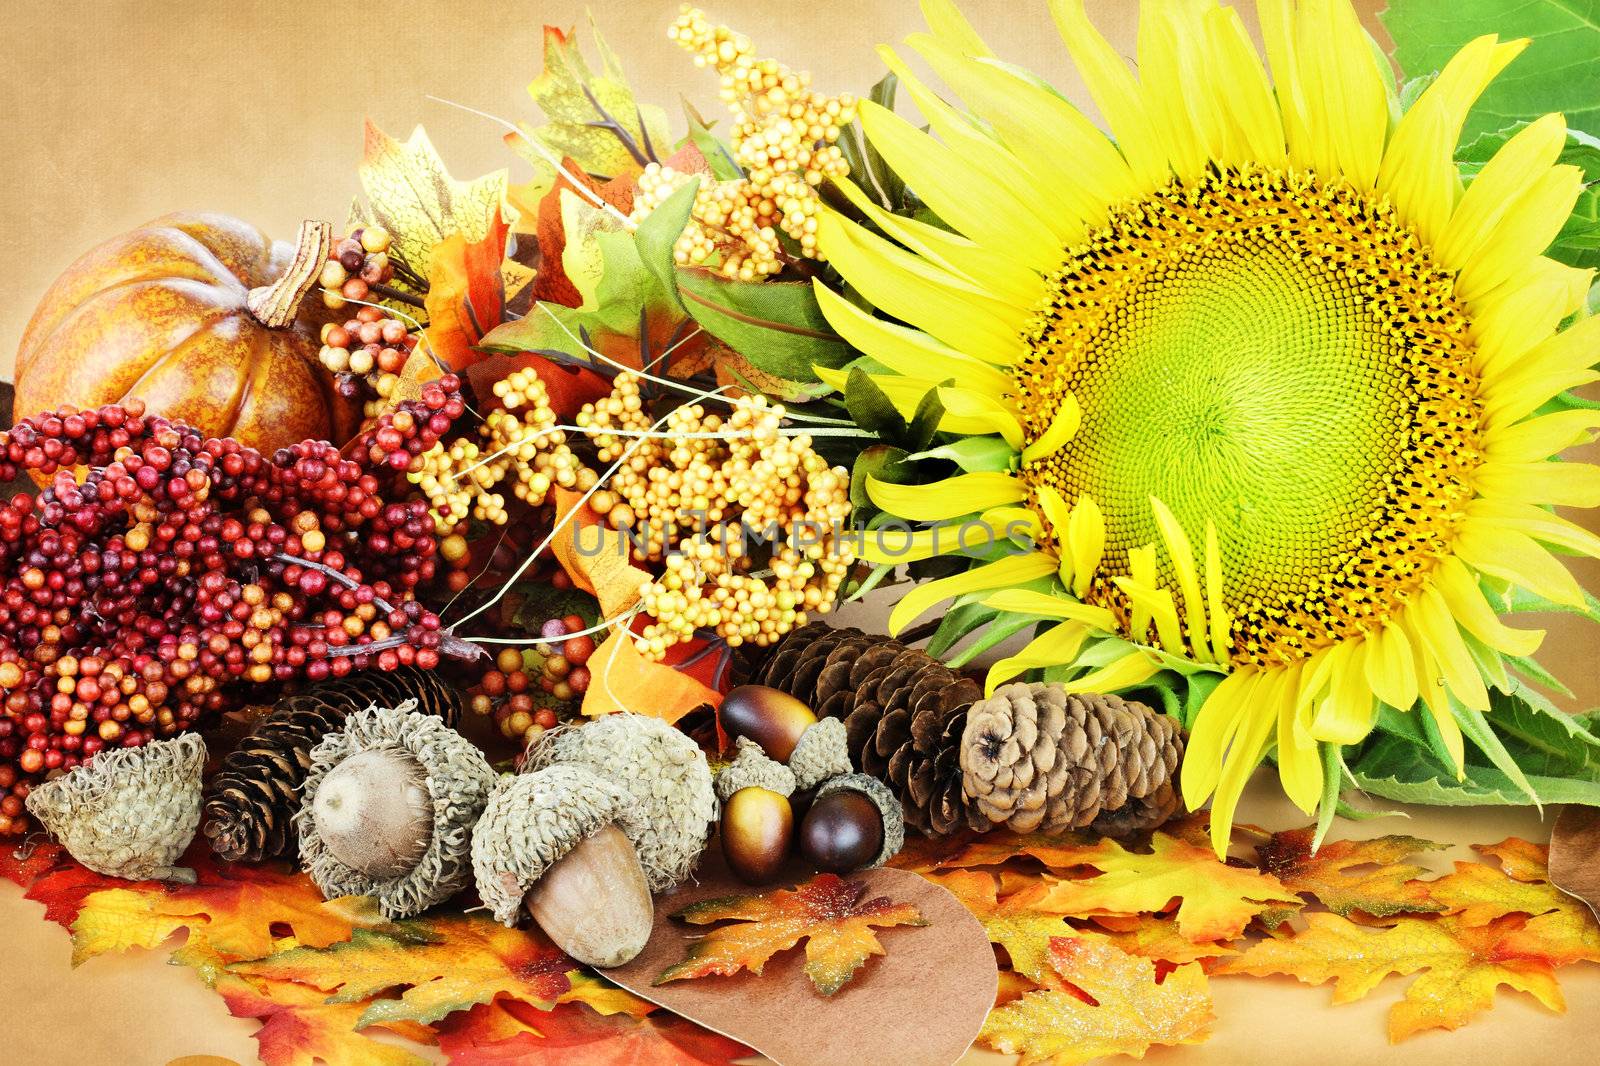 Autumn decorations and flowers with pumpkins, acorns and leaves.
